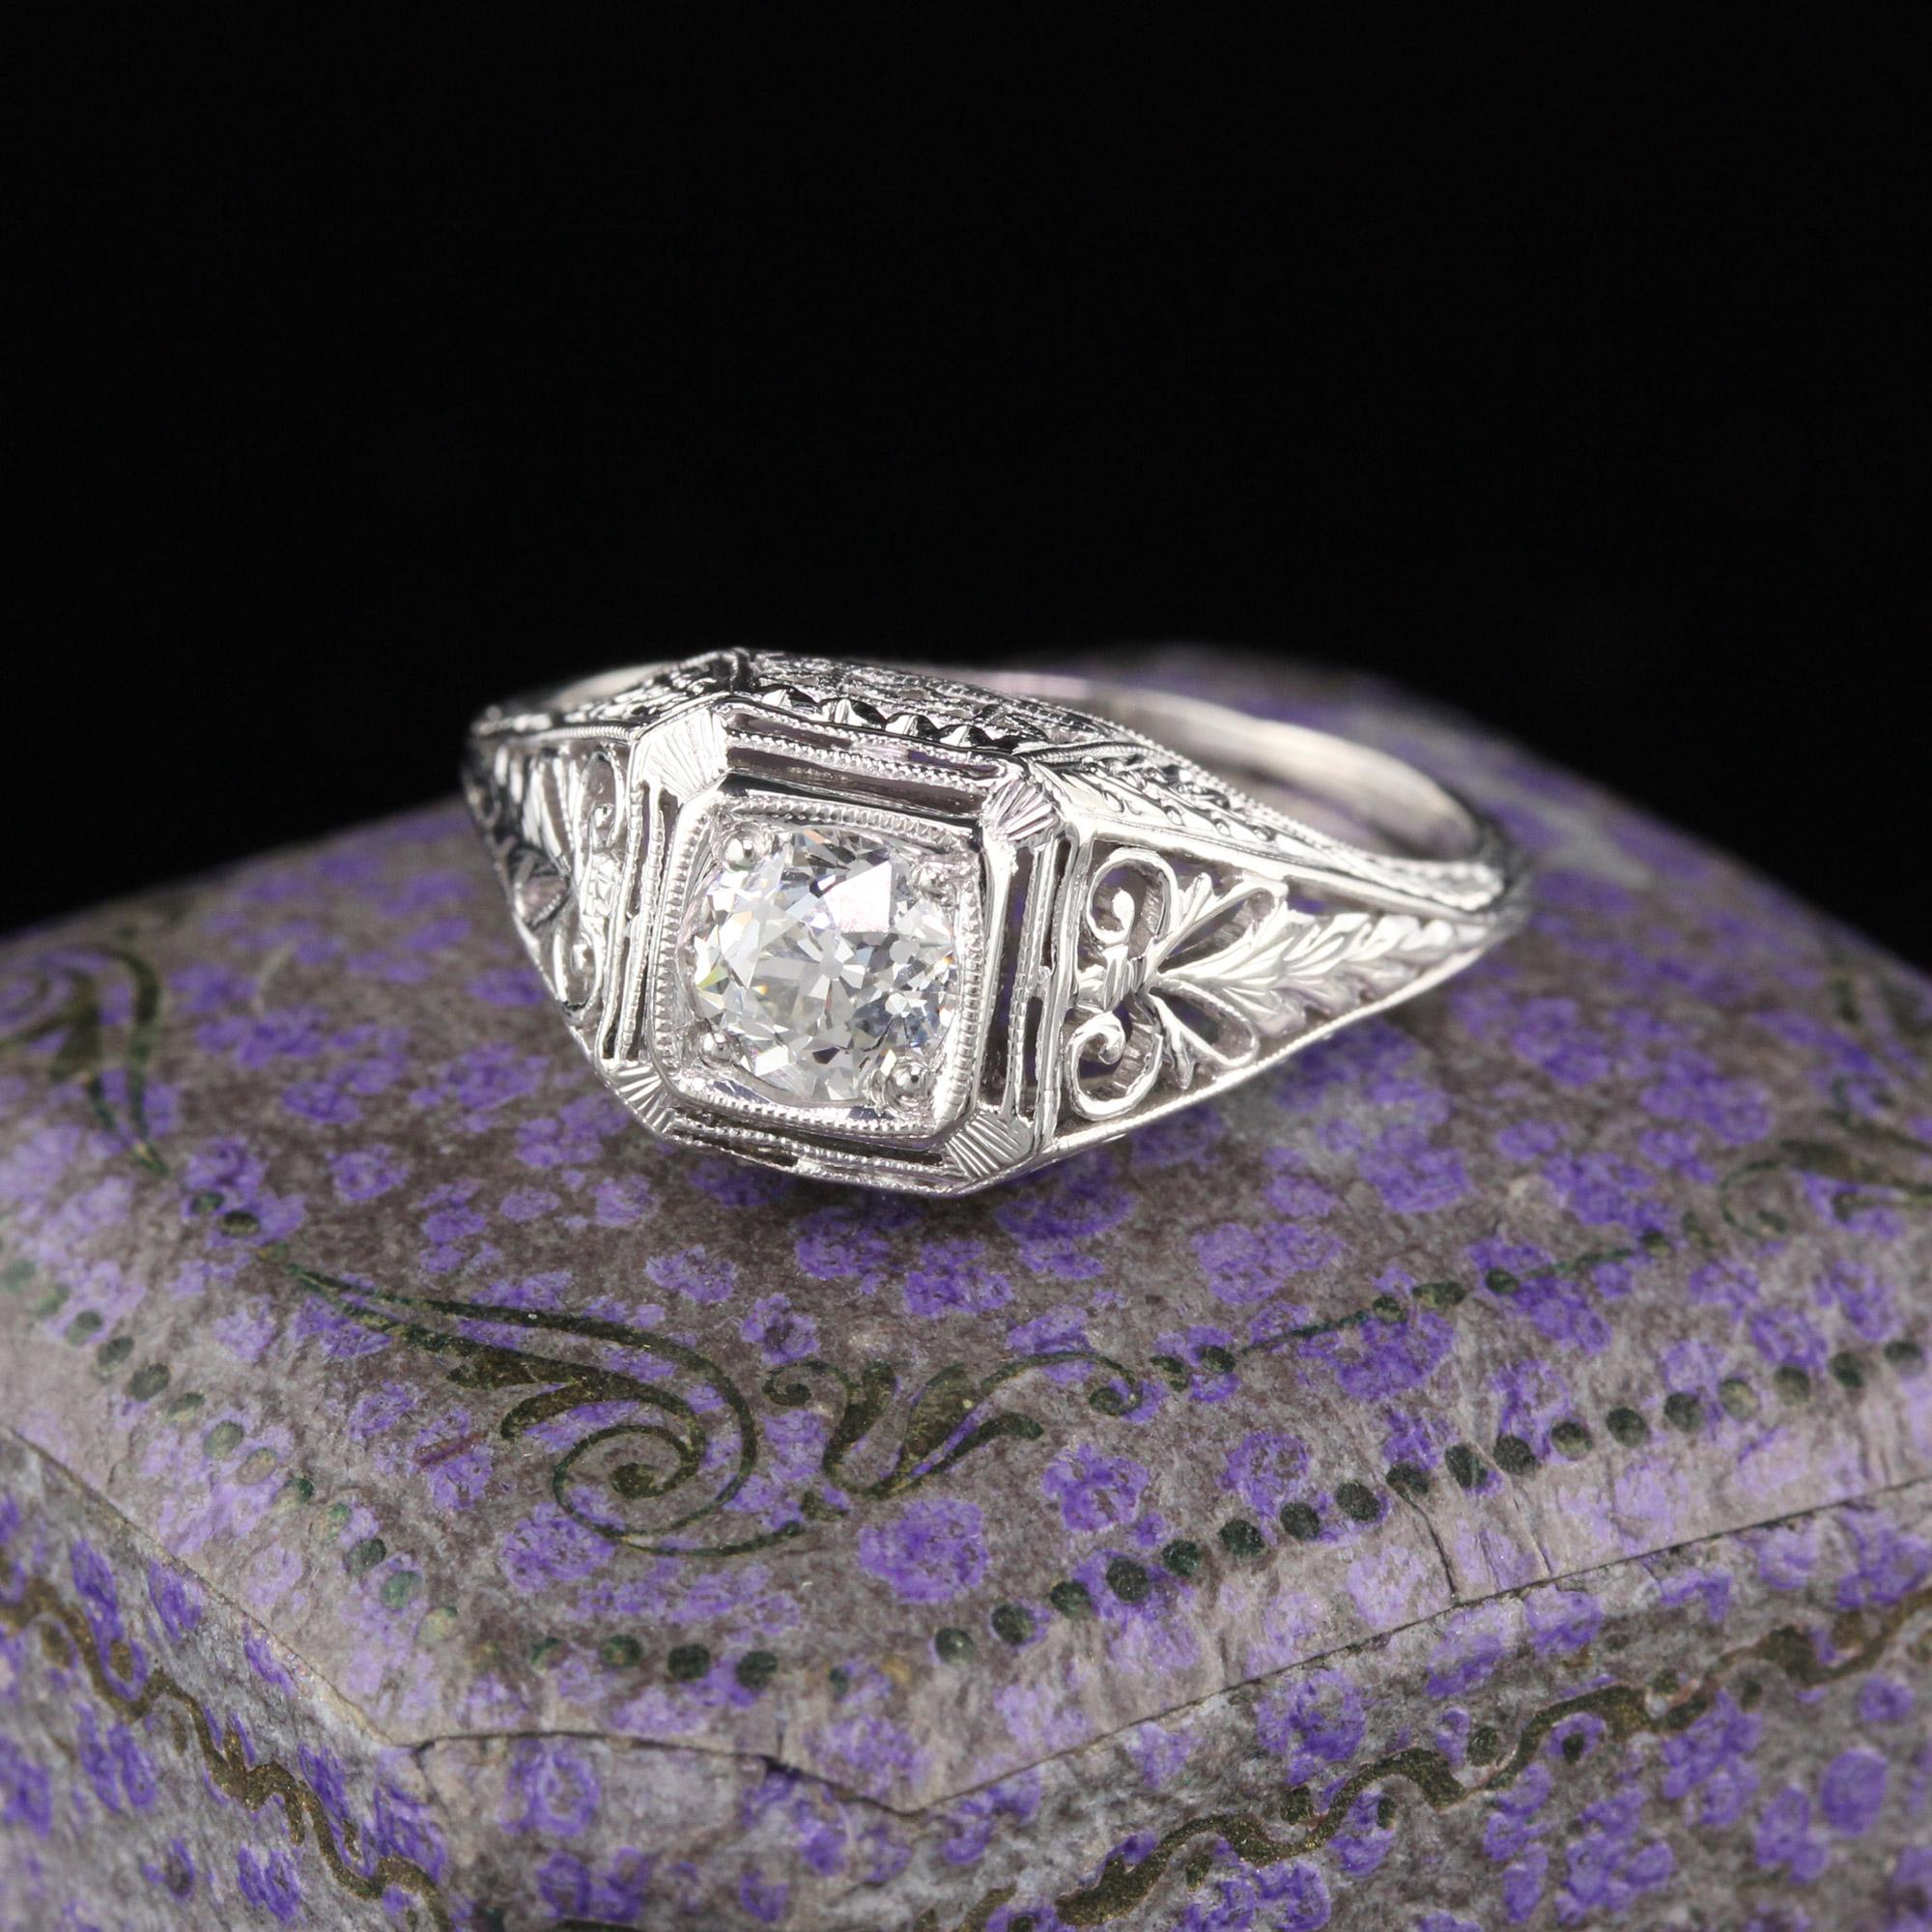 Beautiful Art Deco Platinum Engagement ring with a old european cut diamond in the center and exquisite filigree & engraving work all around.

#R0174

Metal: Platinum

Weight: 3.5 Grams

Total Diamond Weight: 0.50 ct old europan cut diamond

Diamond